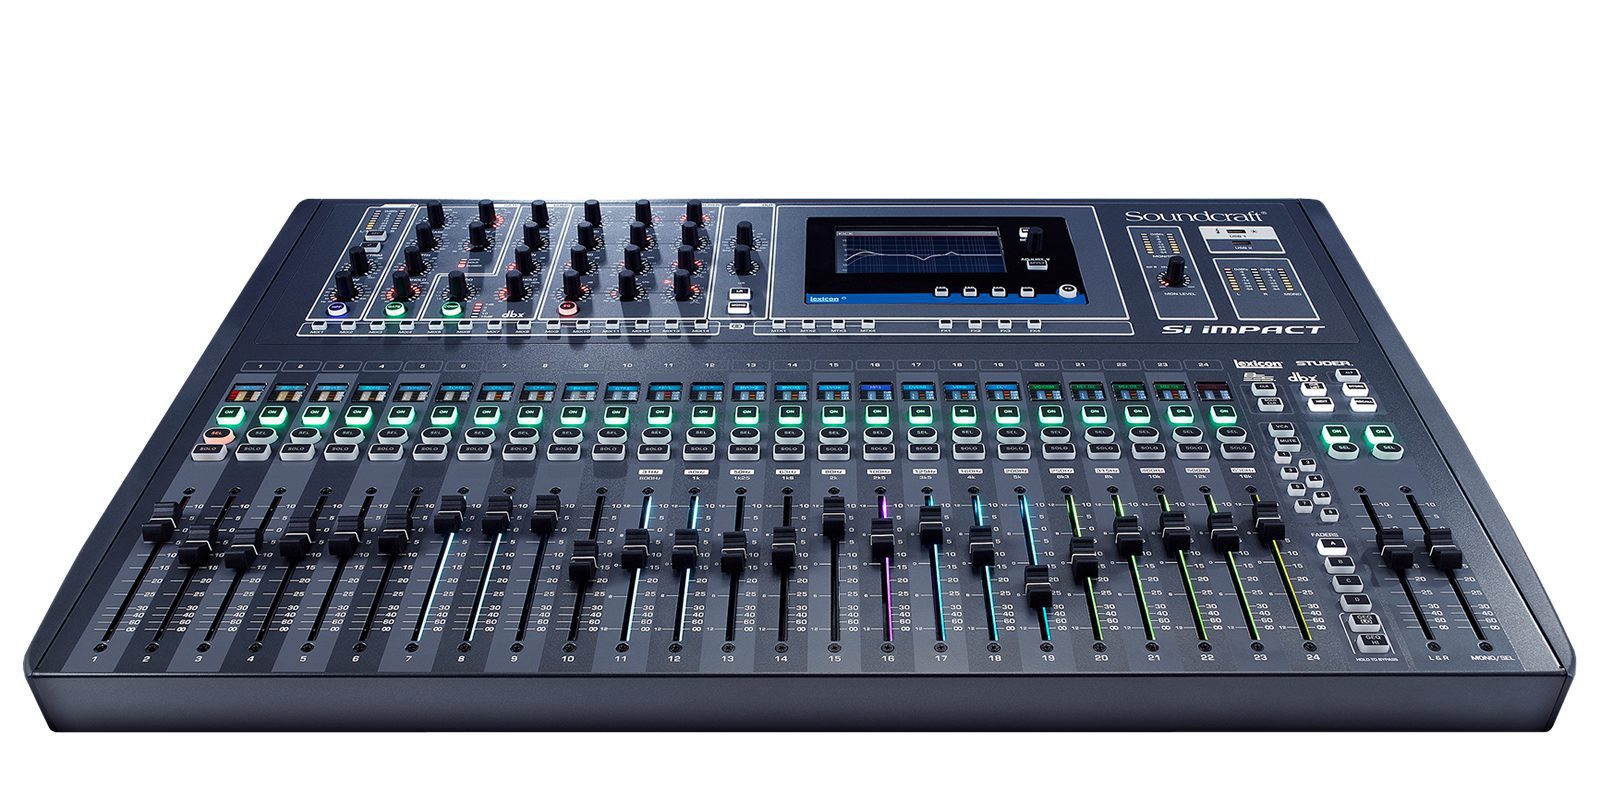 In our continual quest to provide more value to Soundcraft customers, we are happy to announce an incredible free upatedt o the Si Impact that doubles your total channels to mix from 40 to 80! The newest firmware— V2.0 Build 0012—optimizes performance with the free ViSi Remote iOS application and clarifies terminology when routing to or from stage boxes.